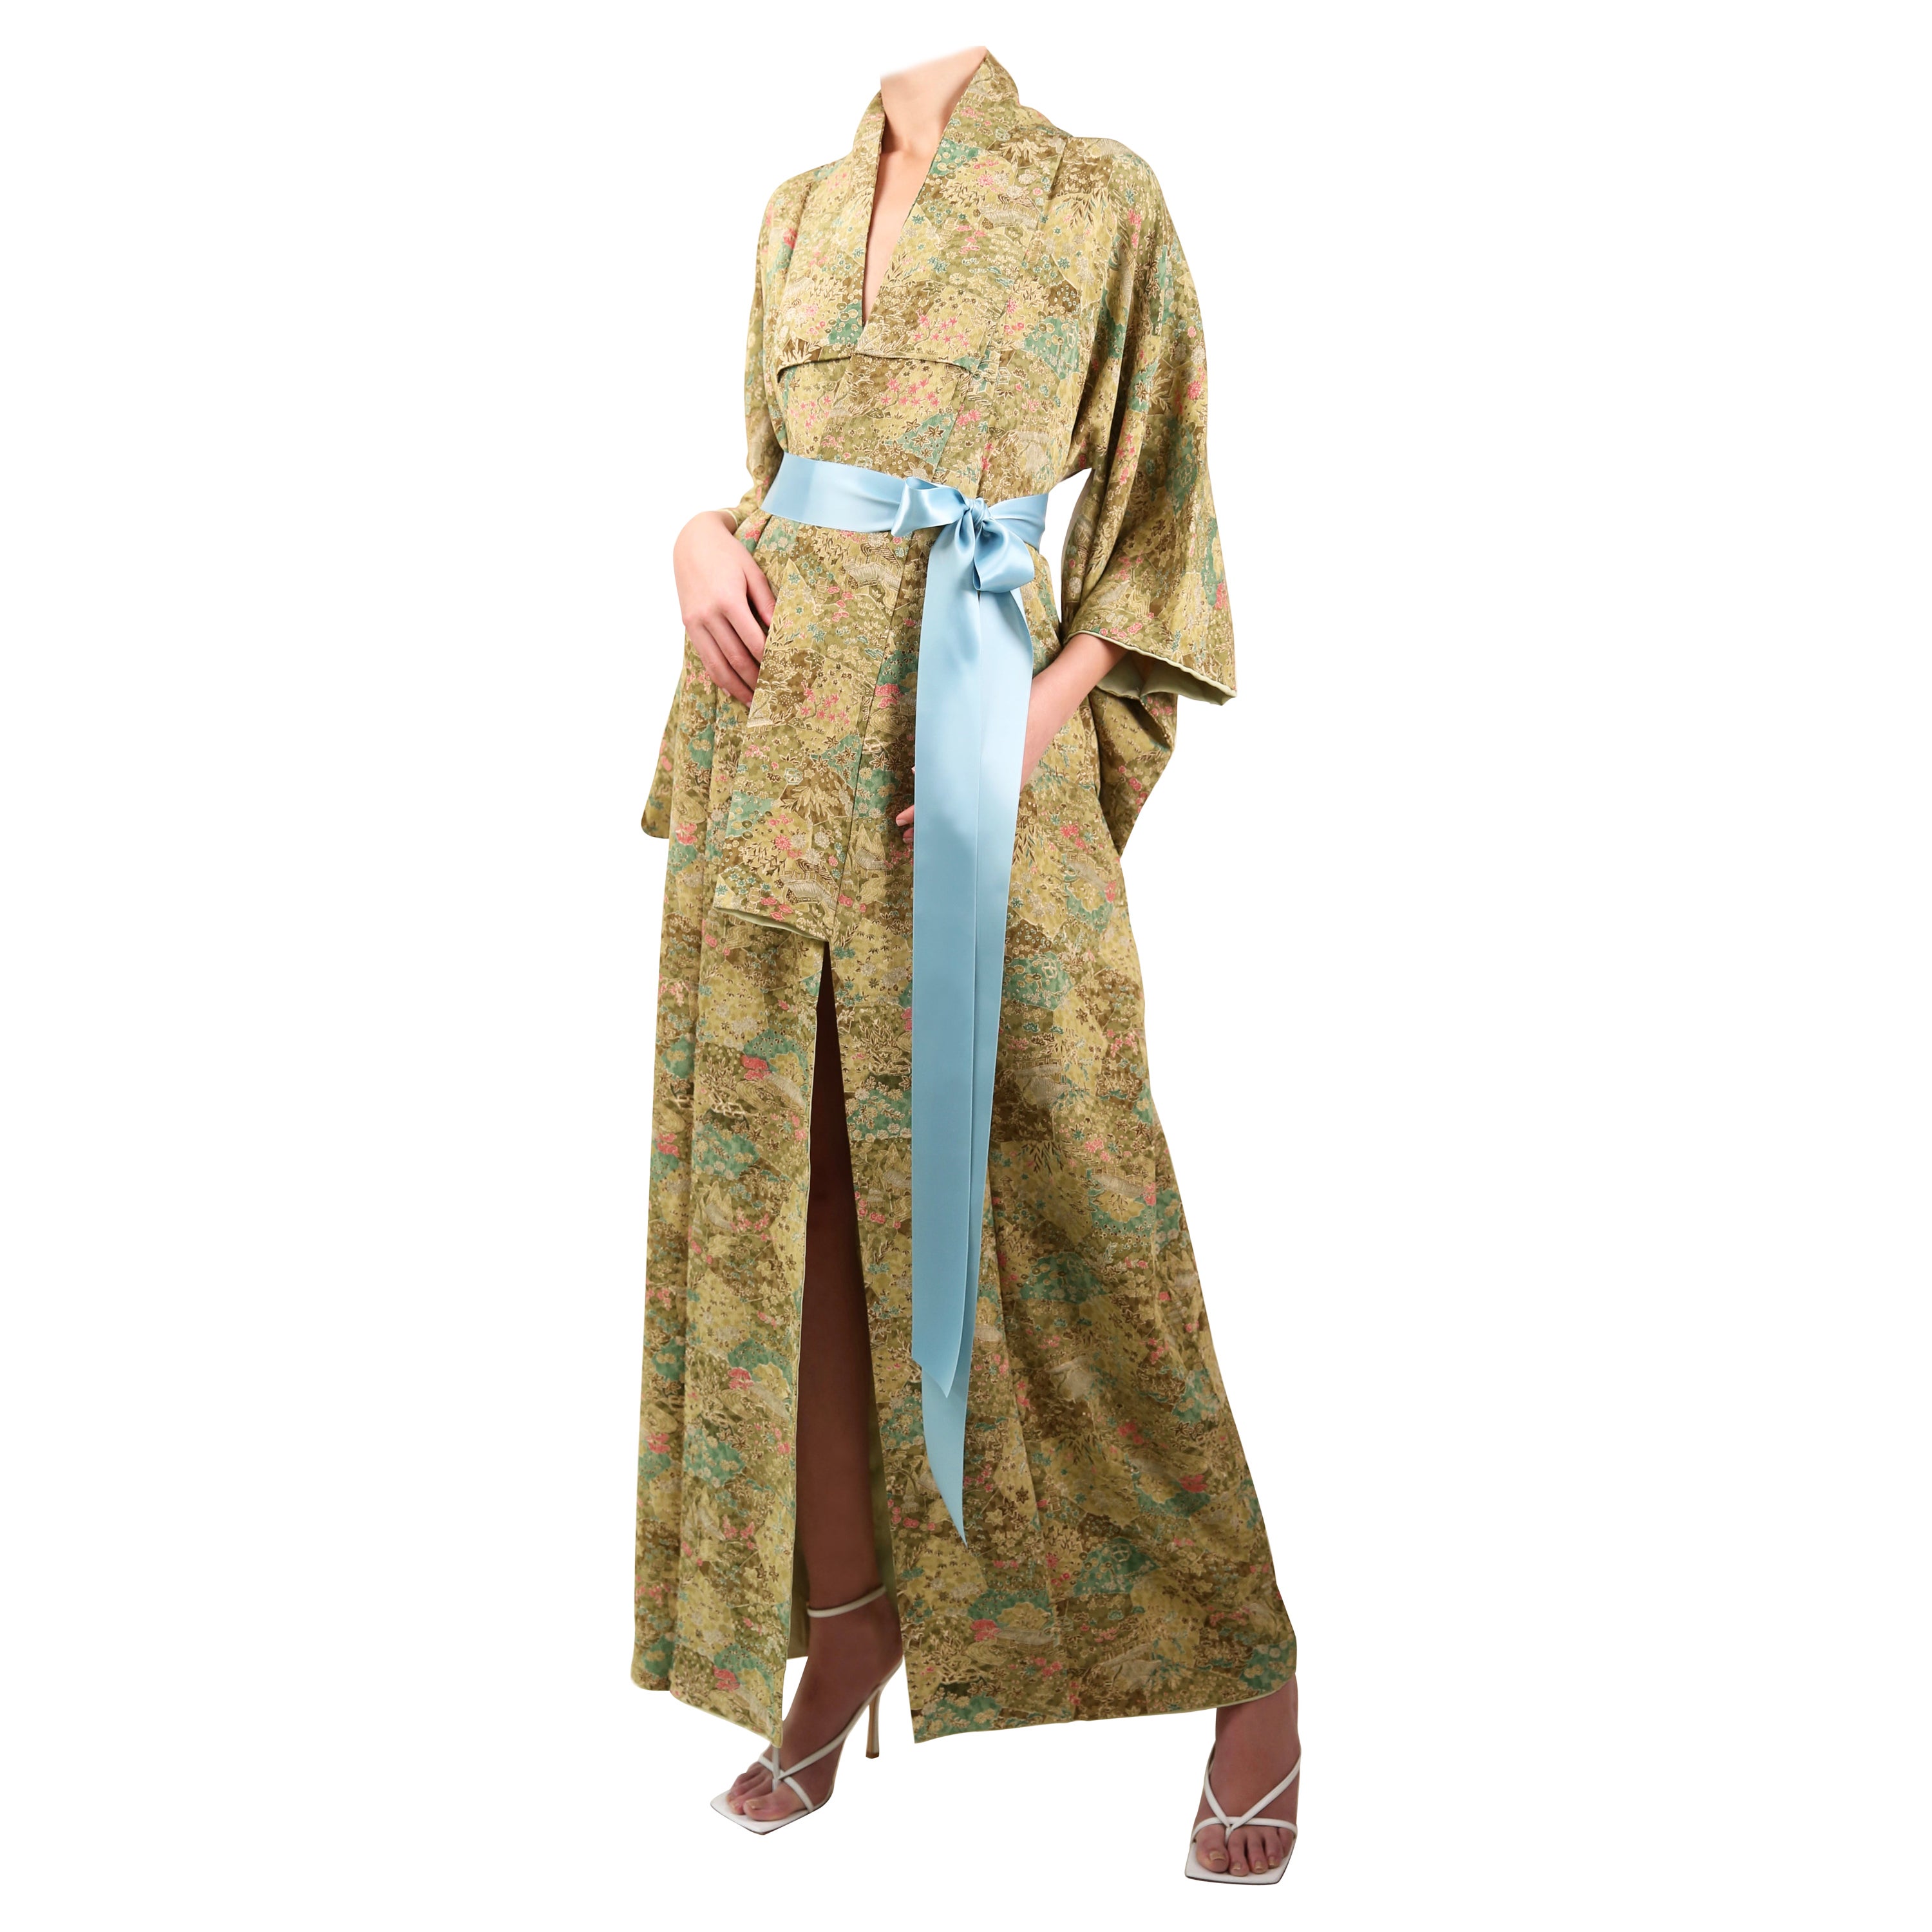 Vintage Japanese hand made green floral silk over coat maxi robe gown kimono For Sale